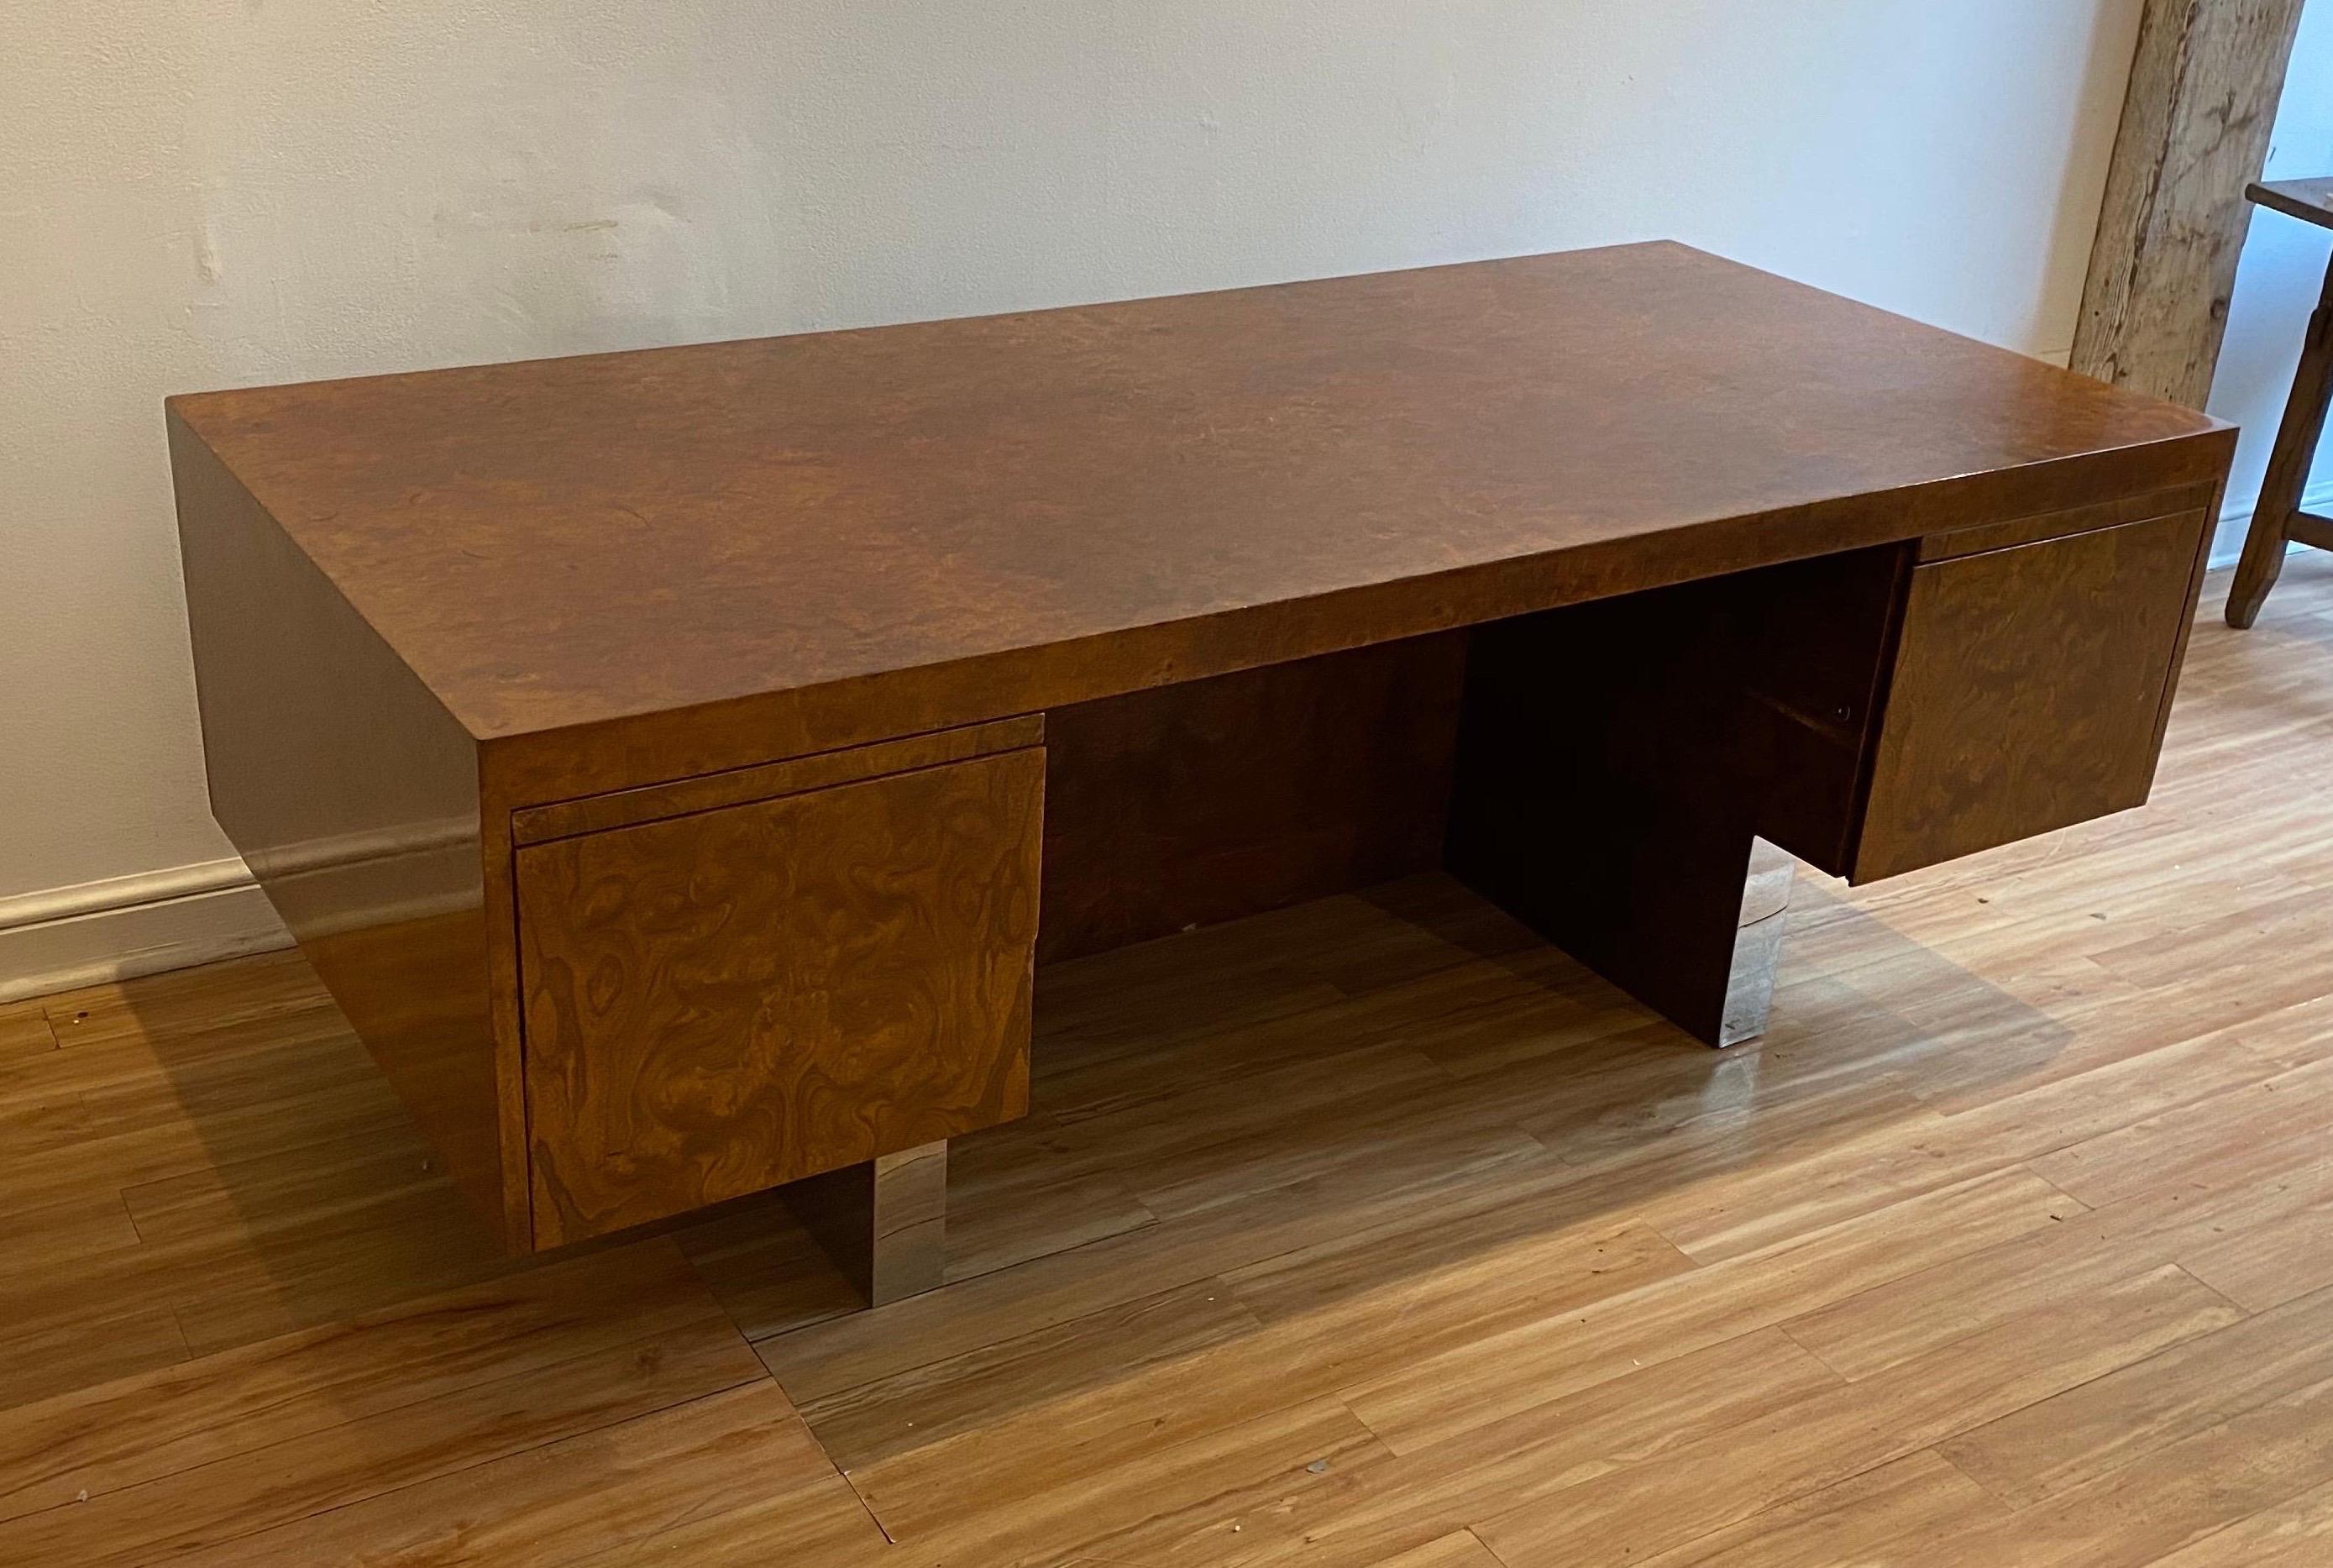 Late 20th Century Burl Wood and Polished Steel Desk by Leon Rosen for Pace Collection, circa 1970